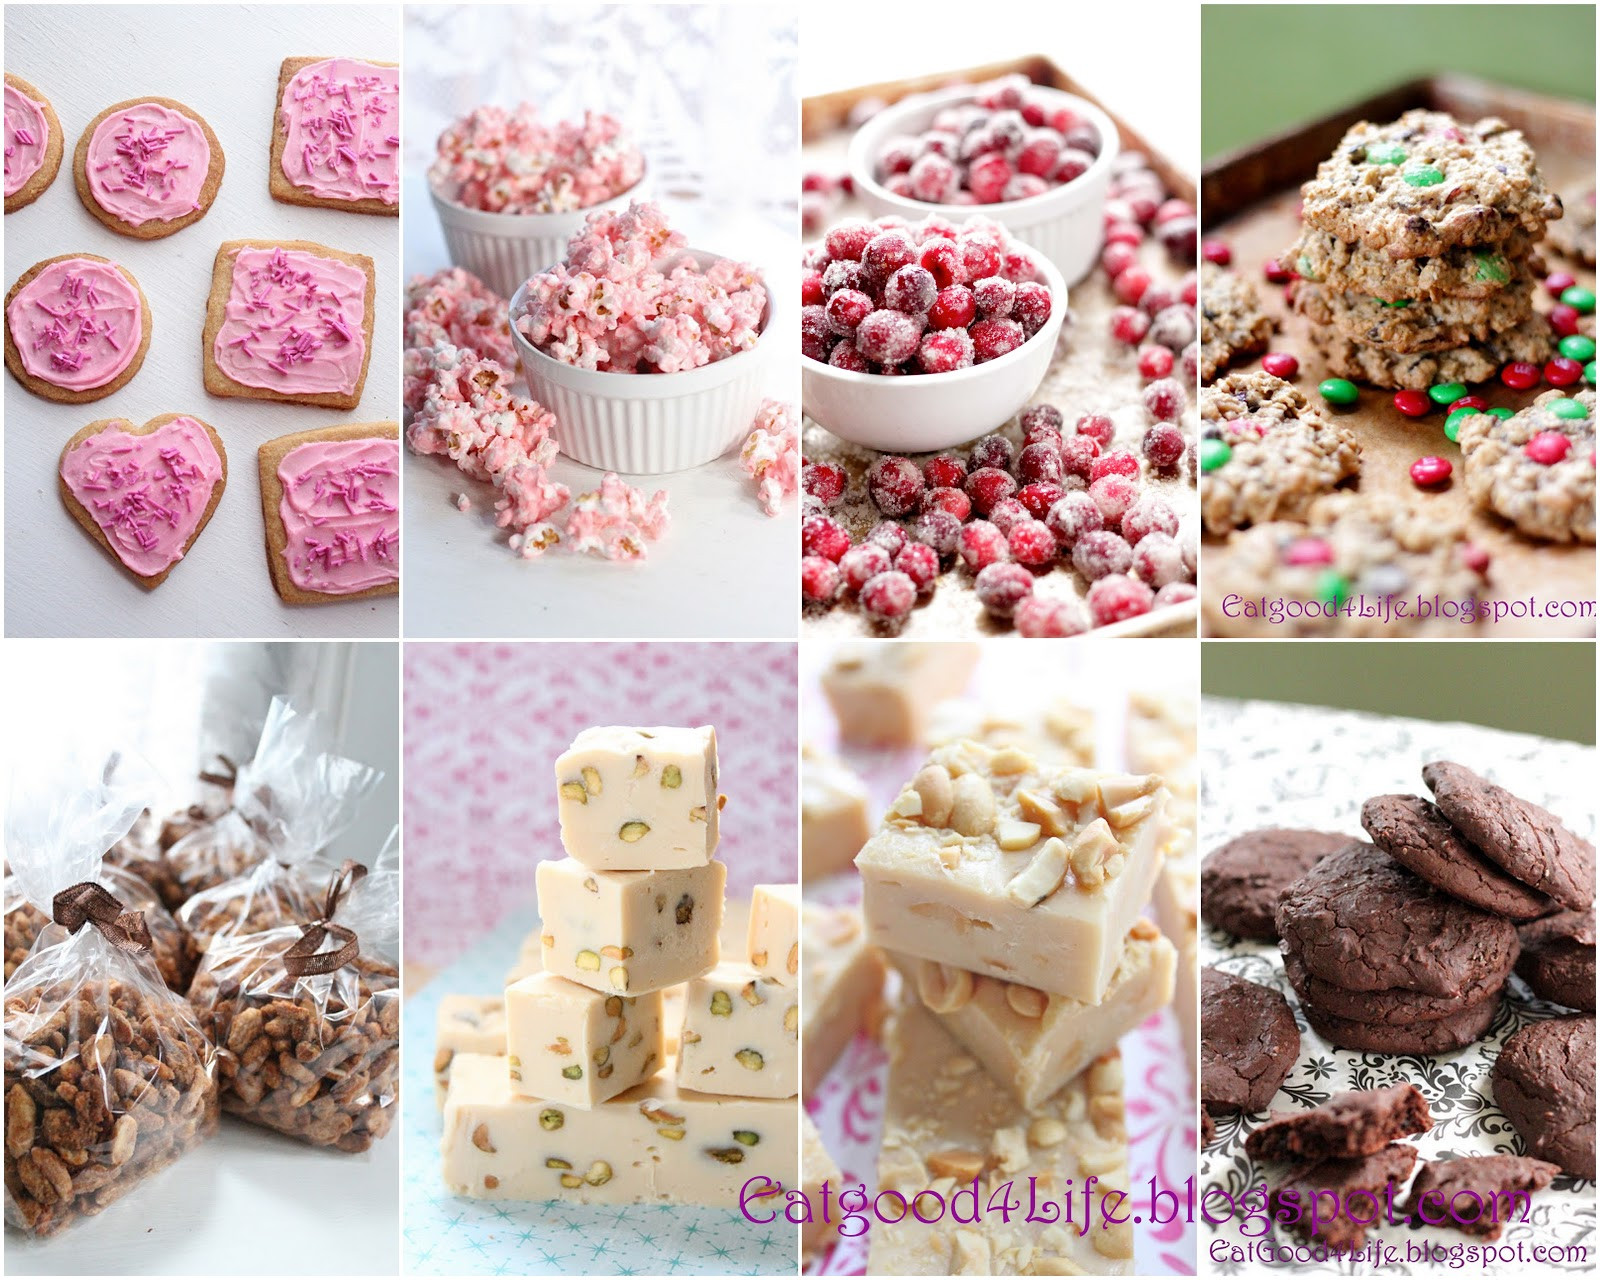 Baking Gifts For Christmas
 My Top 16 Christmas t baking ideas